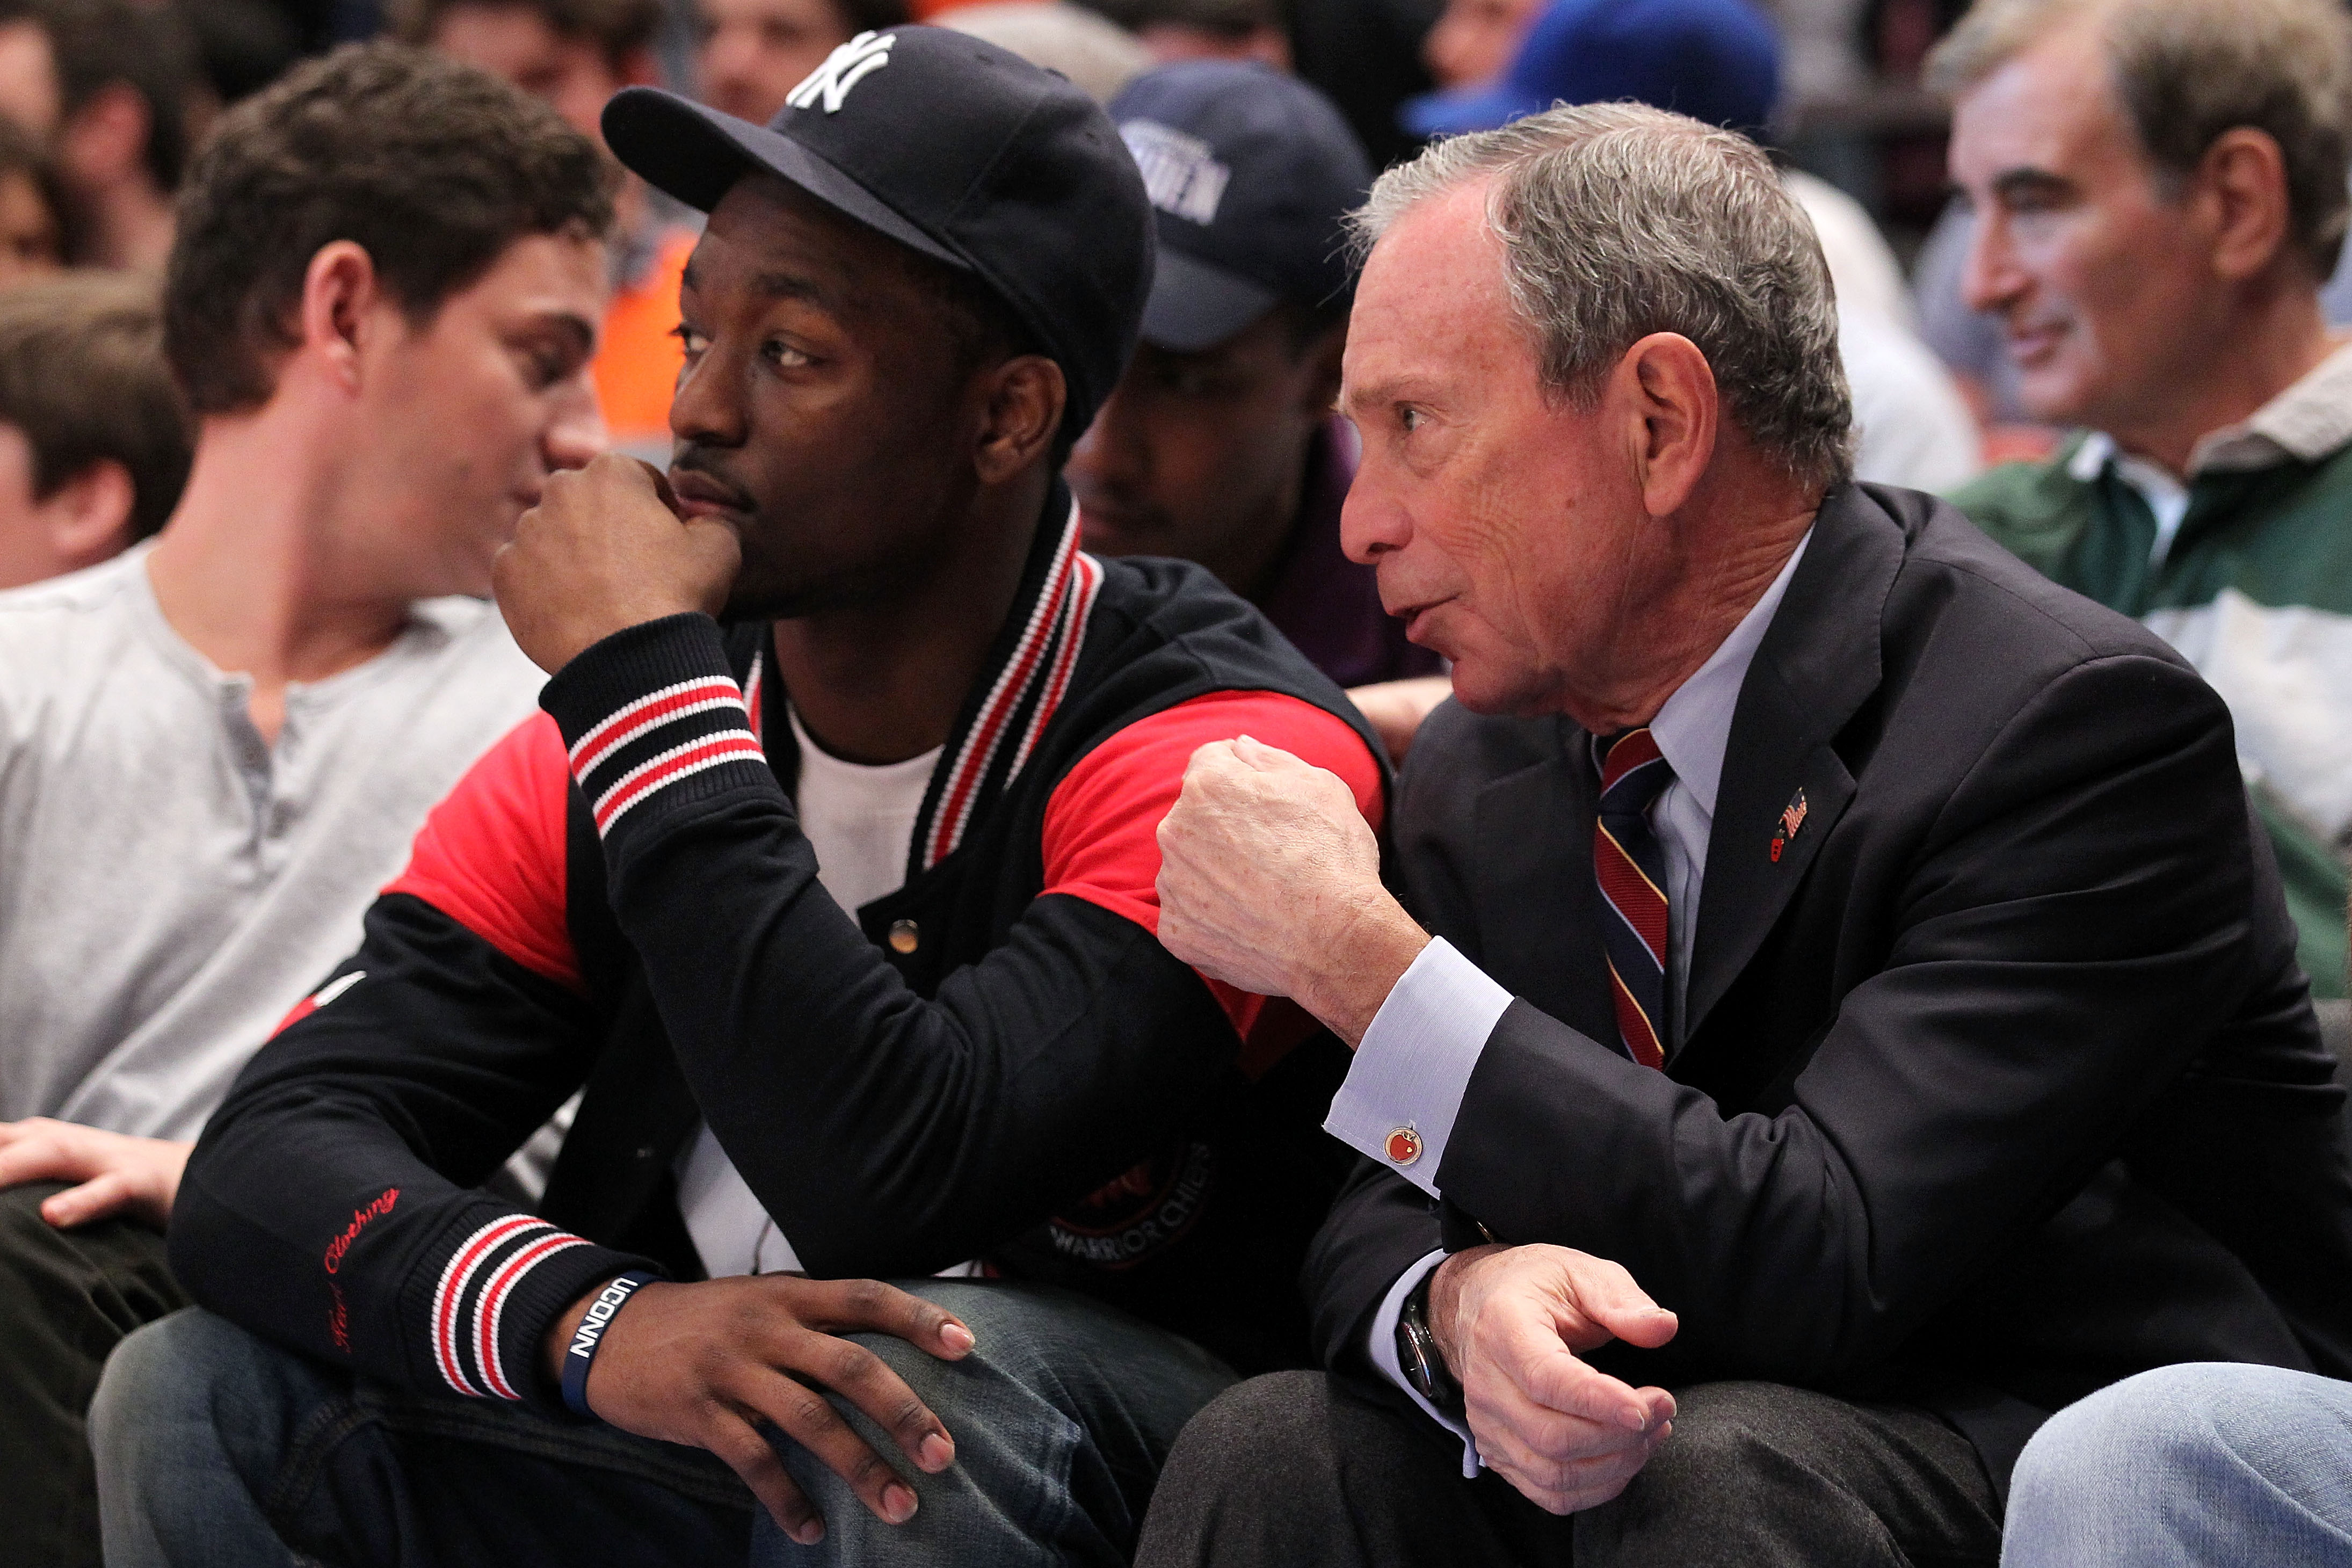 NEW YORK, NY - APRIL 24:  NBA draft prospect Kemba Walker (L) from the University of Connecticut Huskies and New York City Mayor Michael Bloomberg watch the New York Knicks play against the Boston Celtics in Game Four of the Eastern Conference Quarterfina